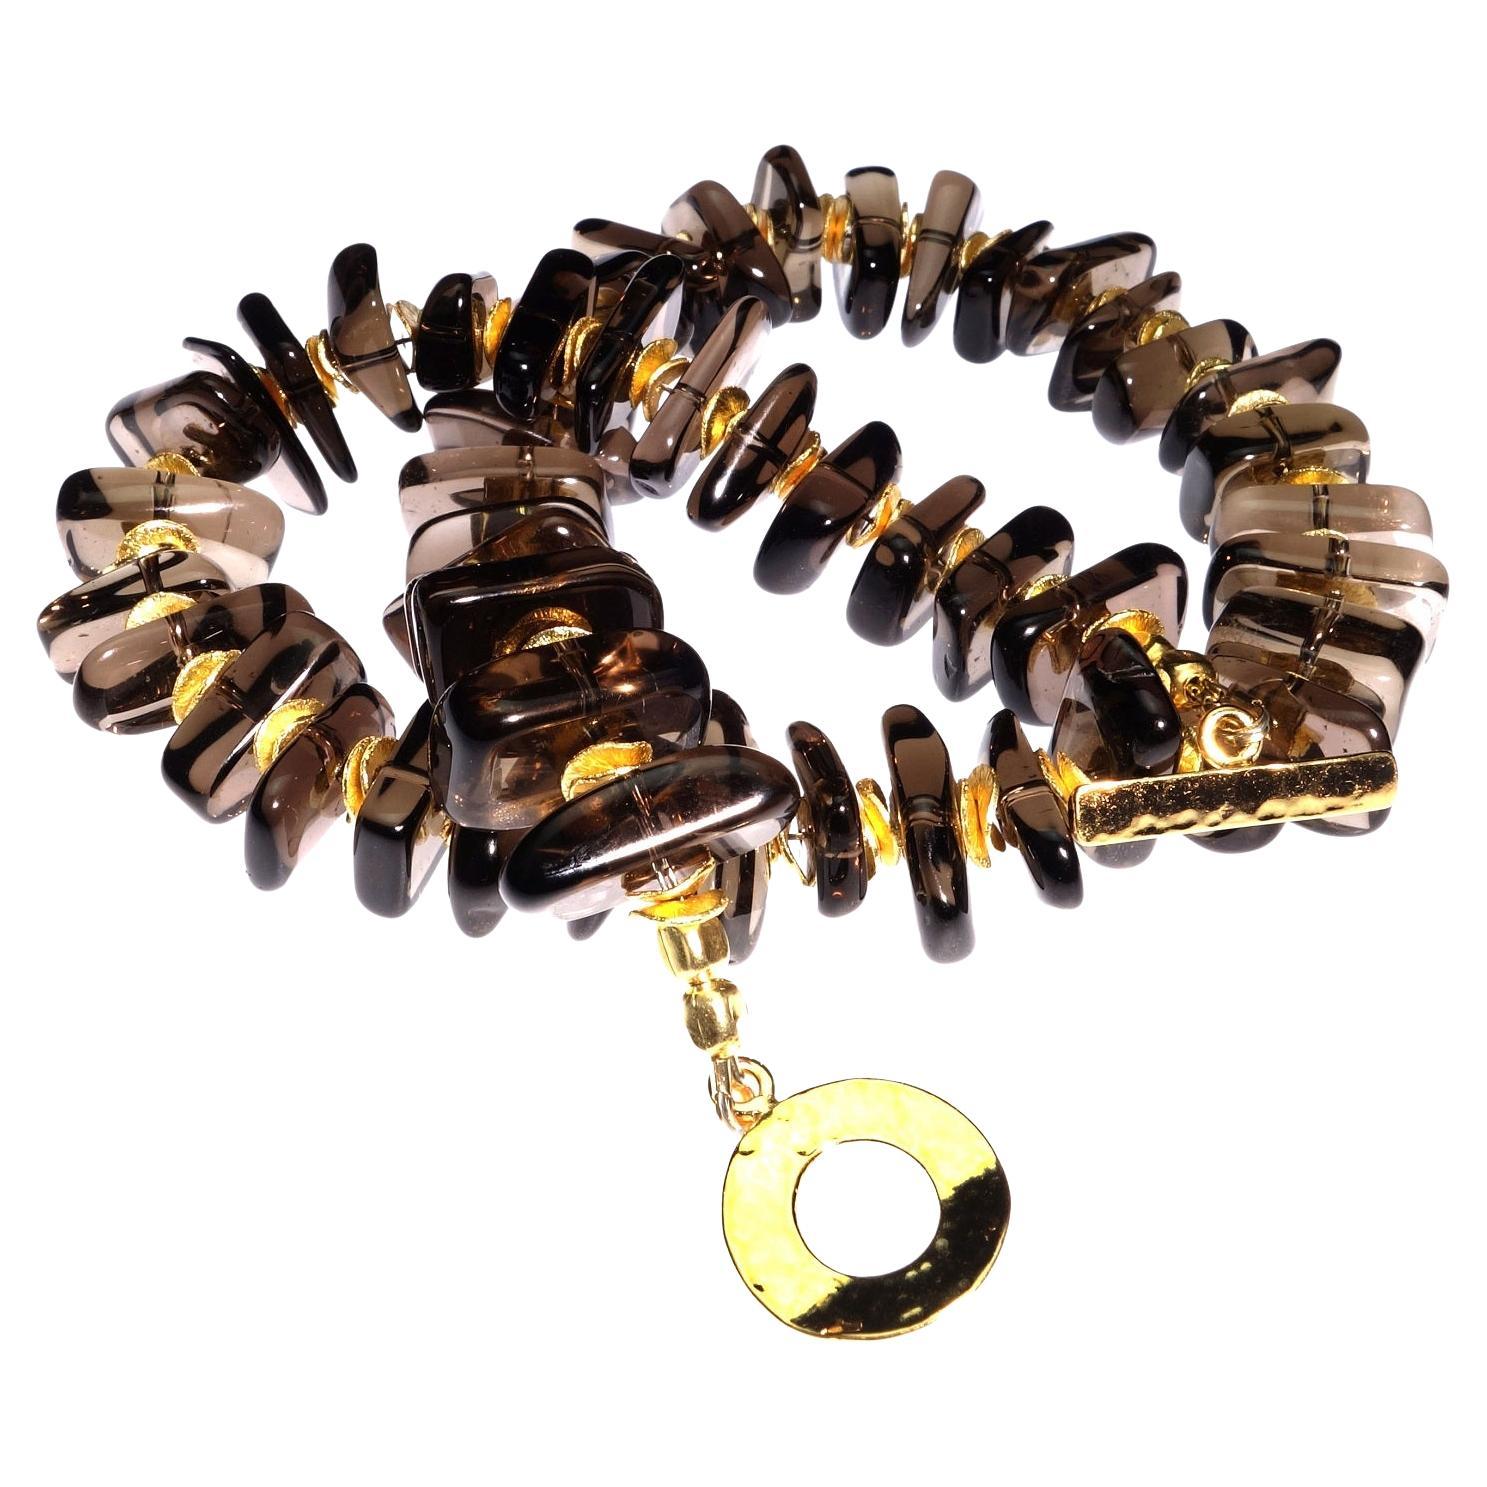 Custom made choker necklace of highly polished free form Smoky Quartz with gold tone accents.  This unique 16 inch choker necklace is a pleasure to wear.  The glowing Smoky Quartz are accented with our favorite gold tone flutters and a gold vermeil